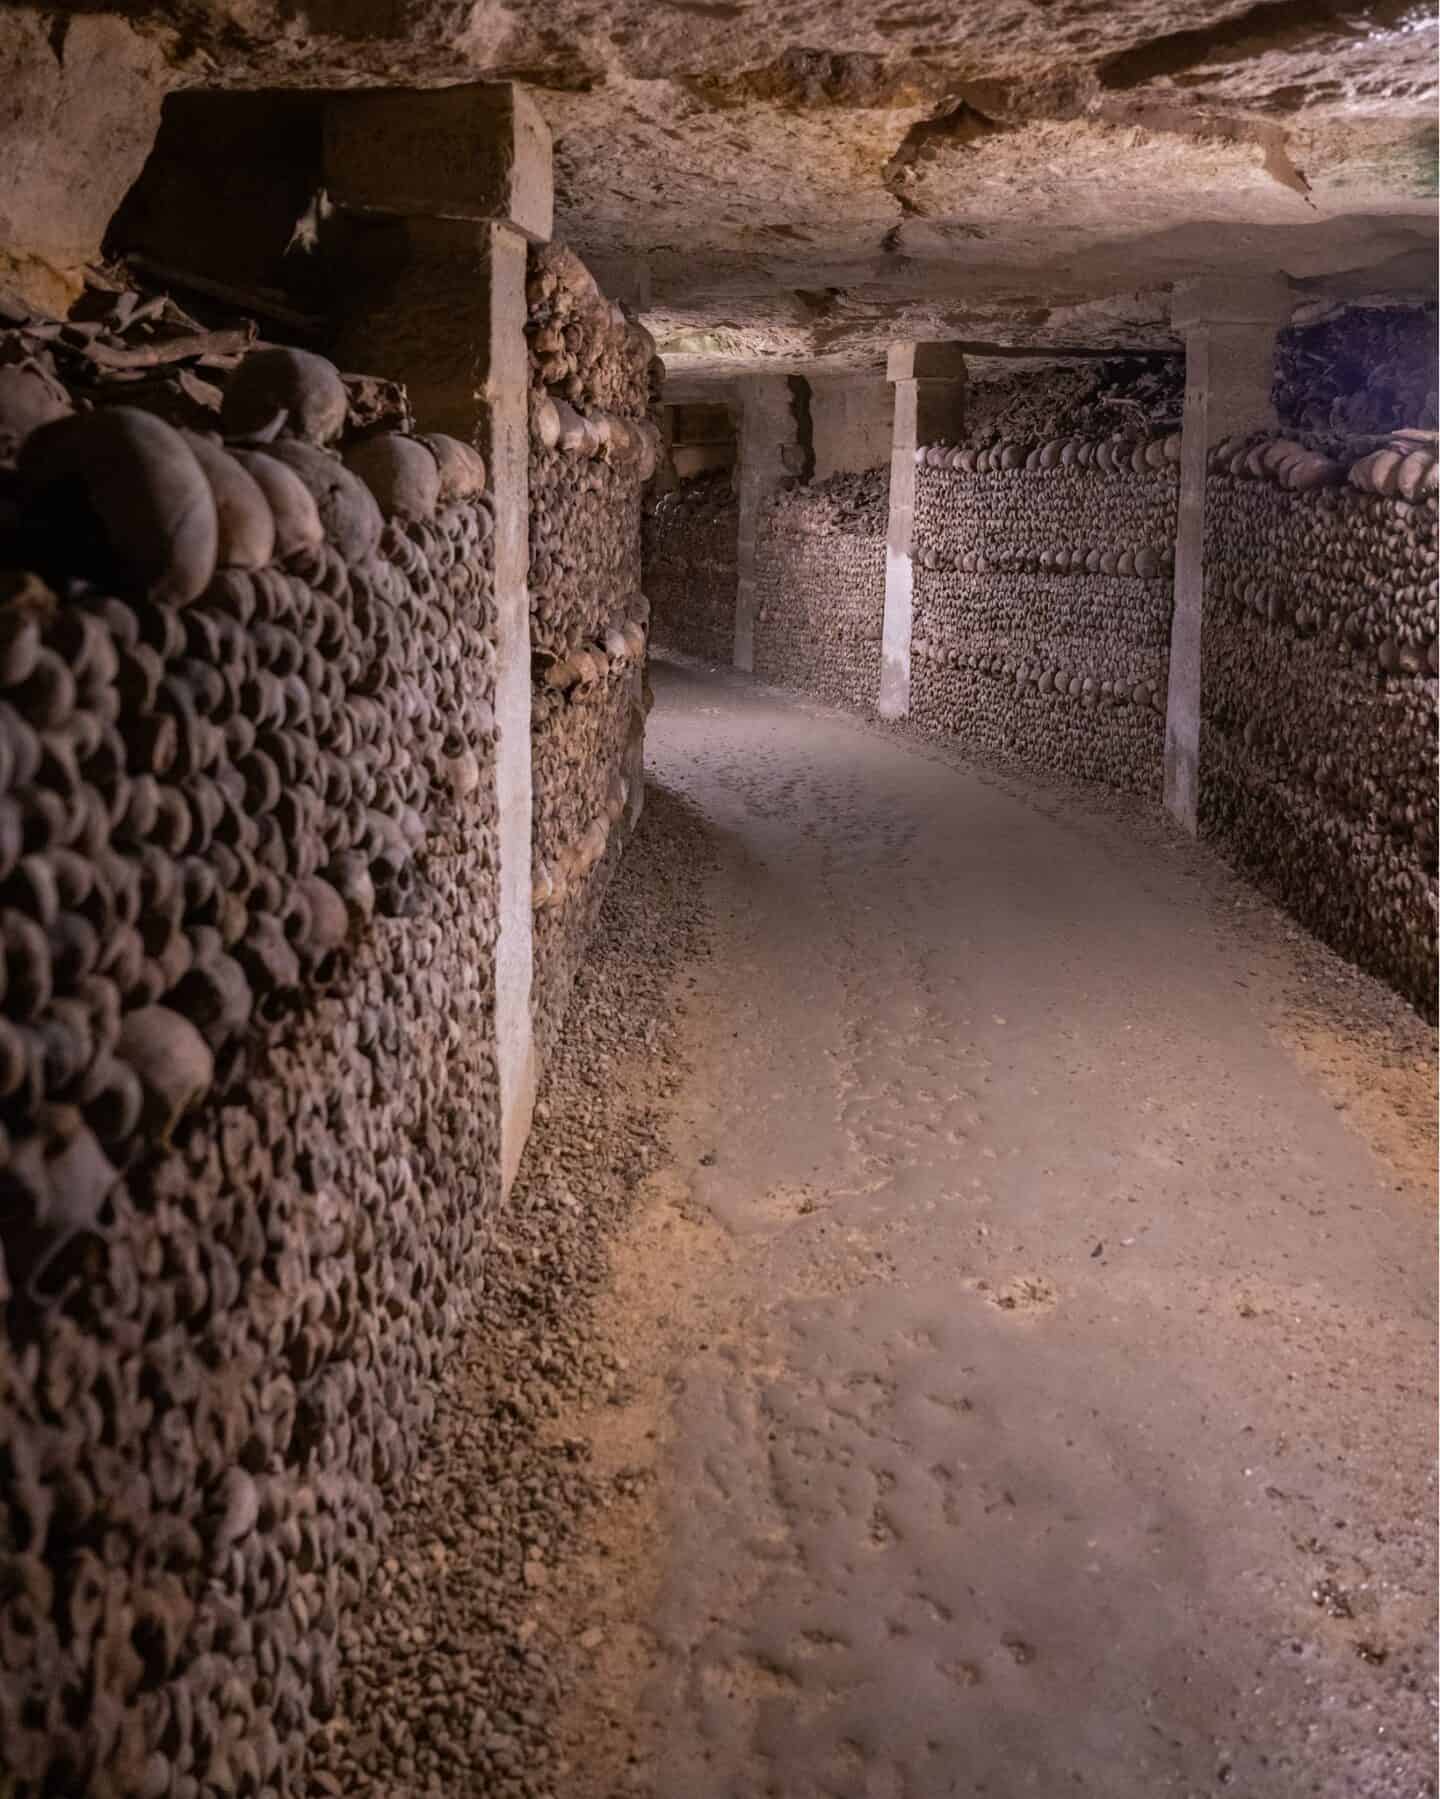 Should you visit the Catacombs of Paris if you don't like small spaces